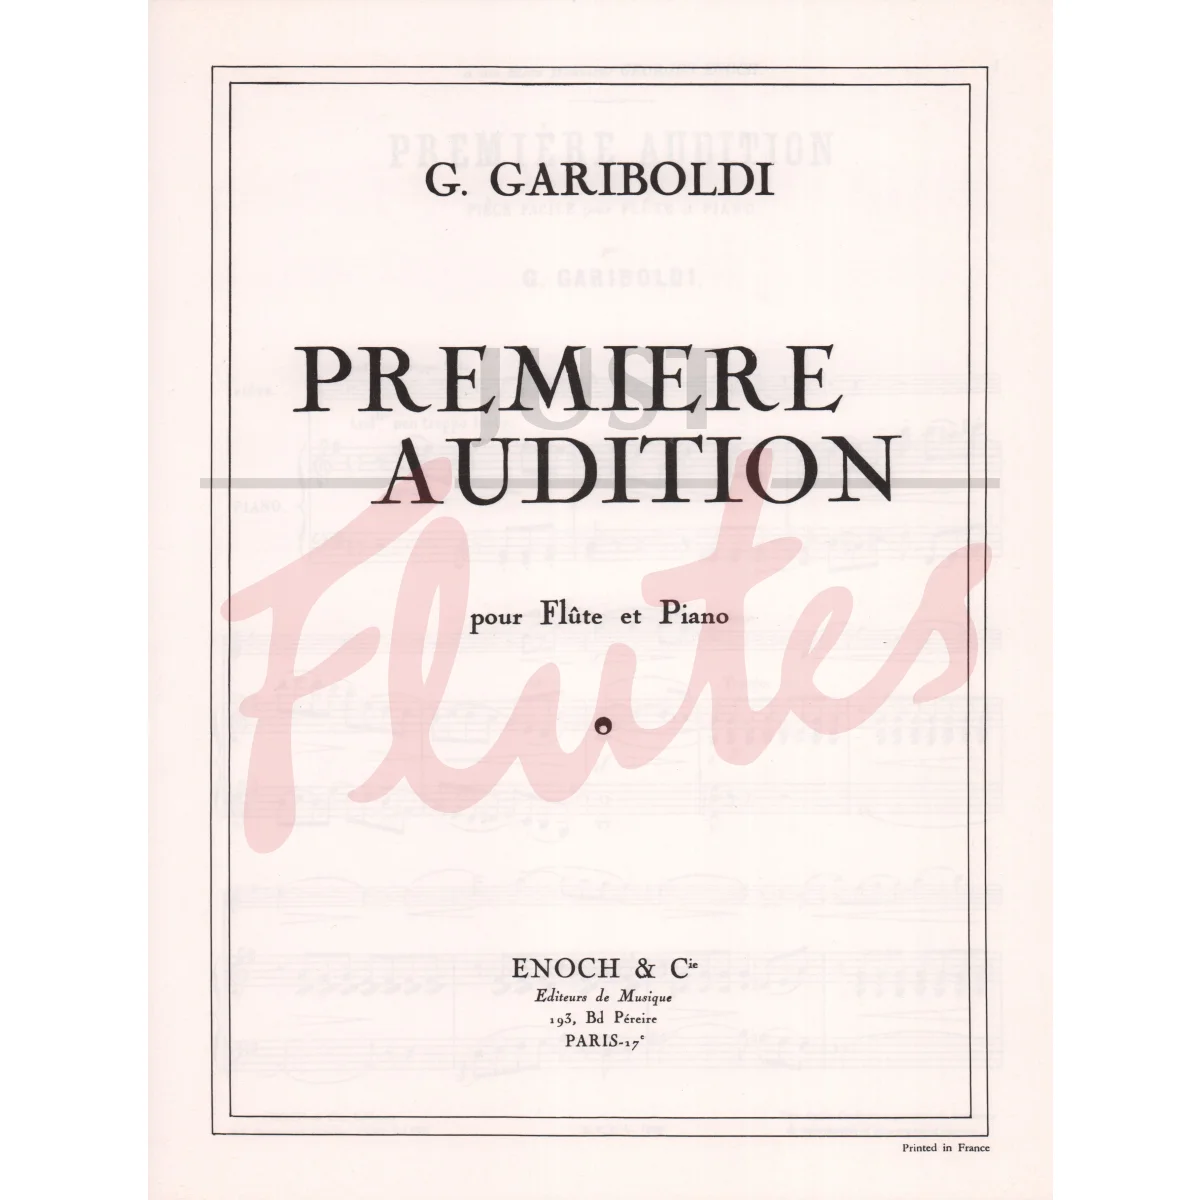 Premier Audition for Flute and Piano